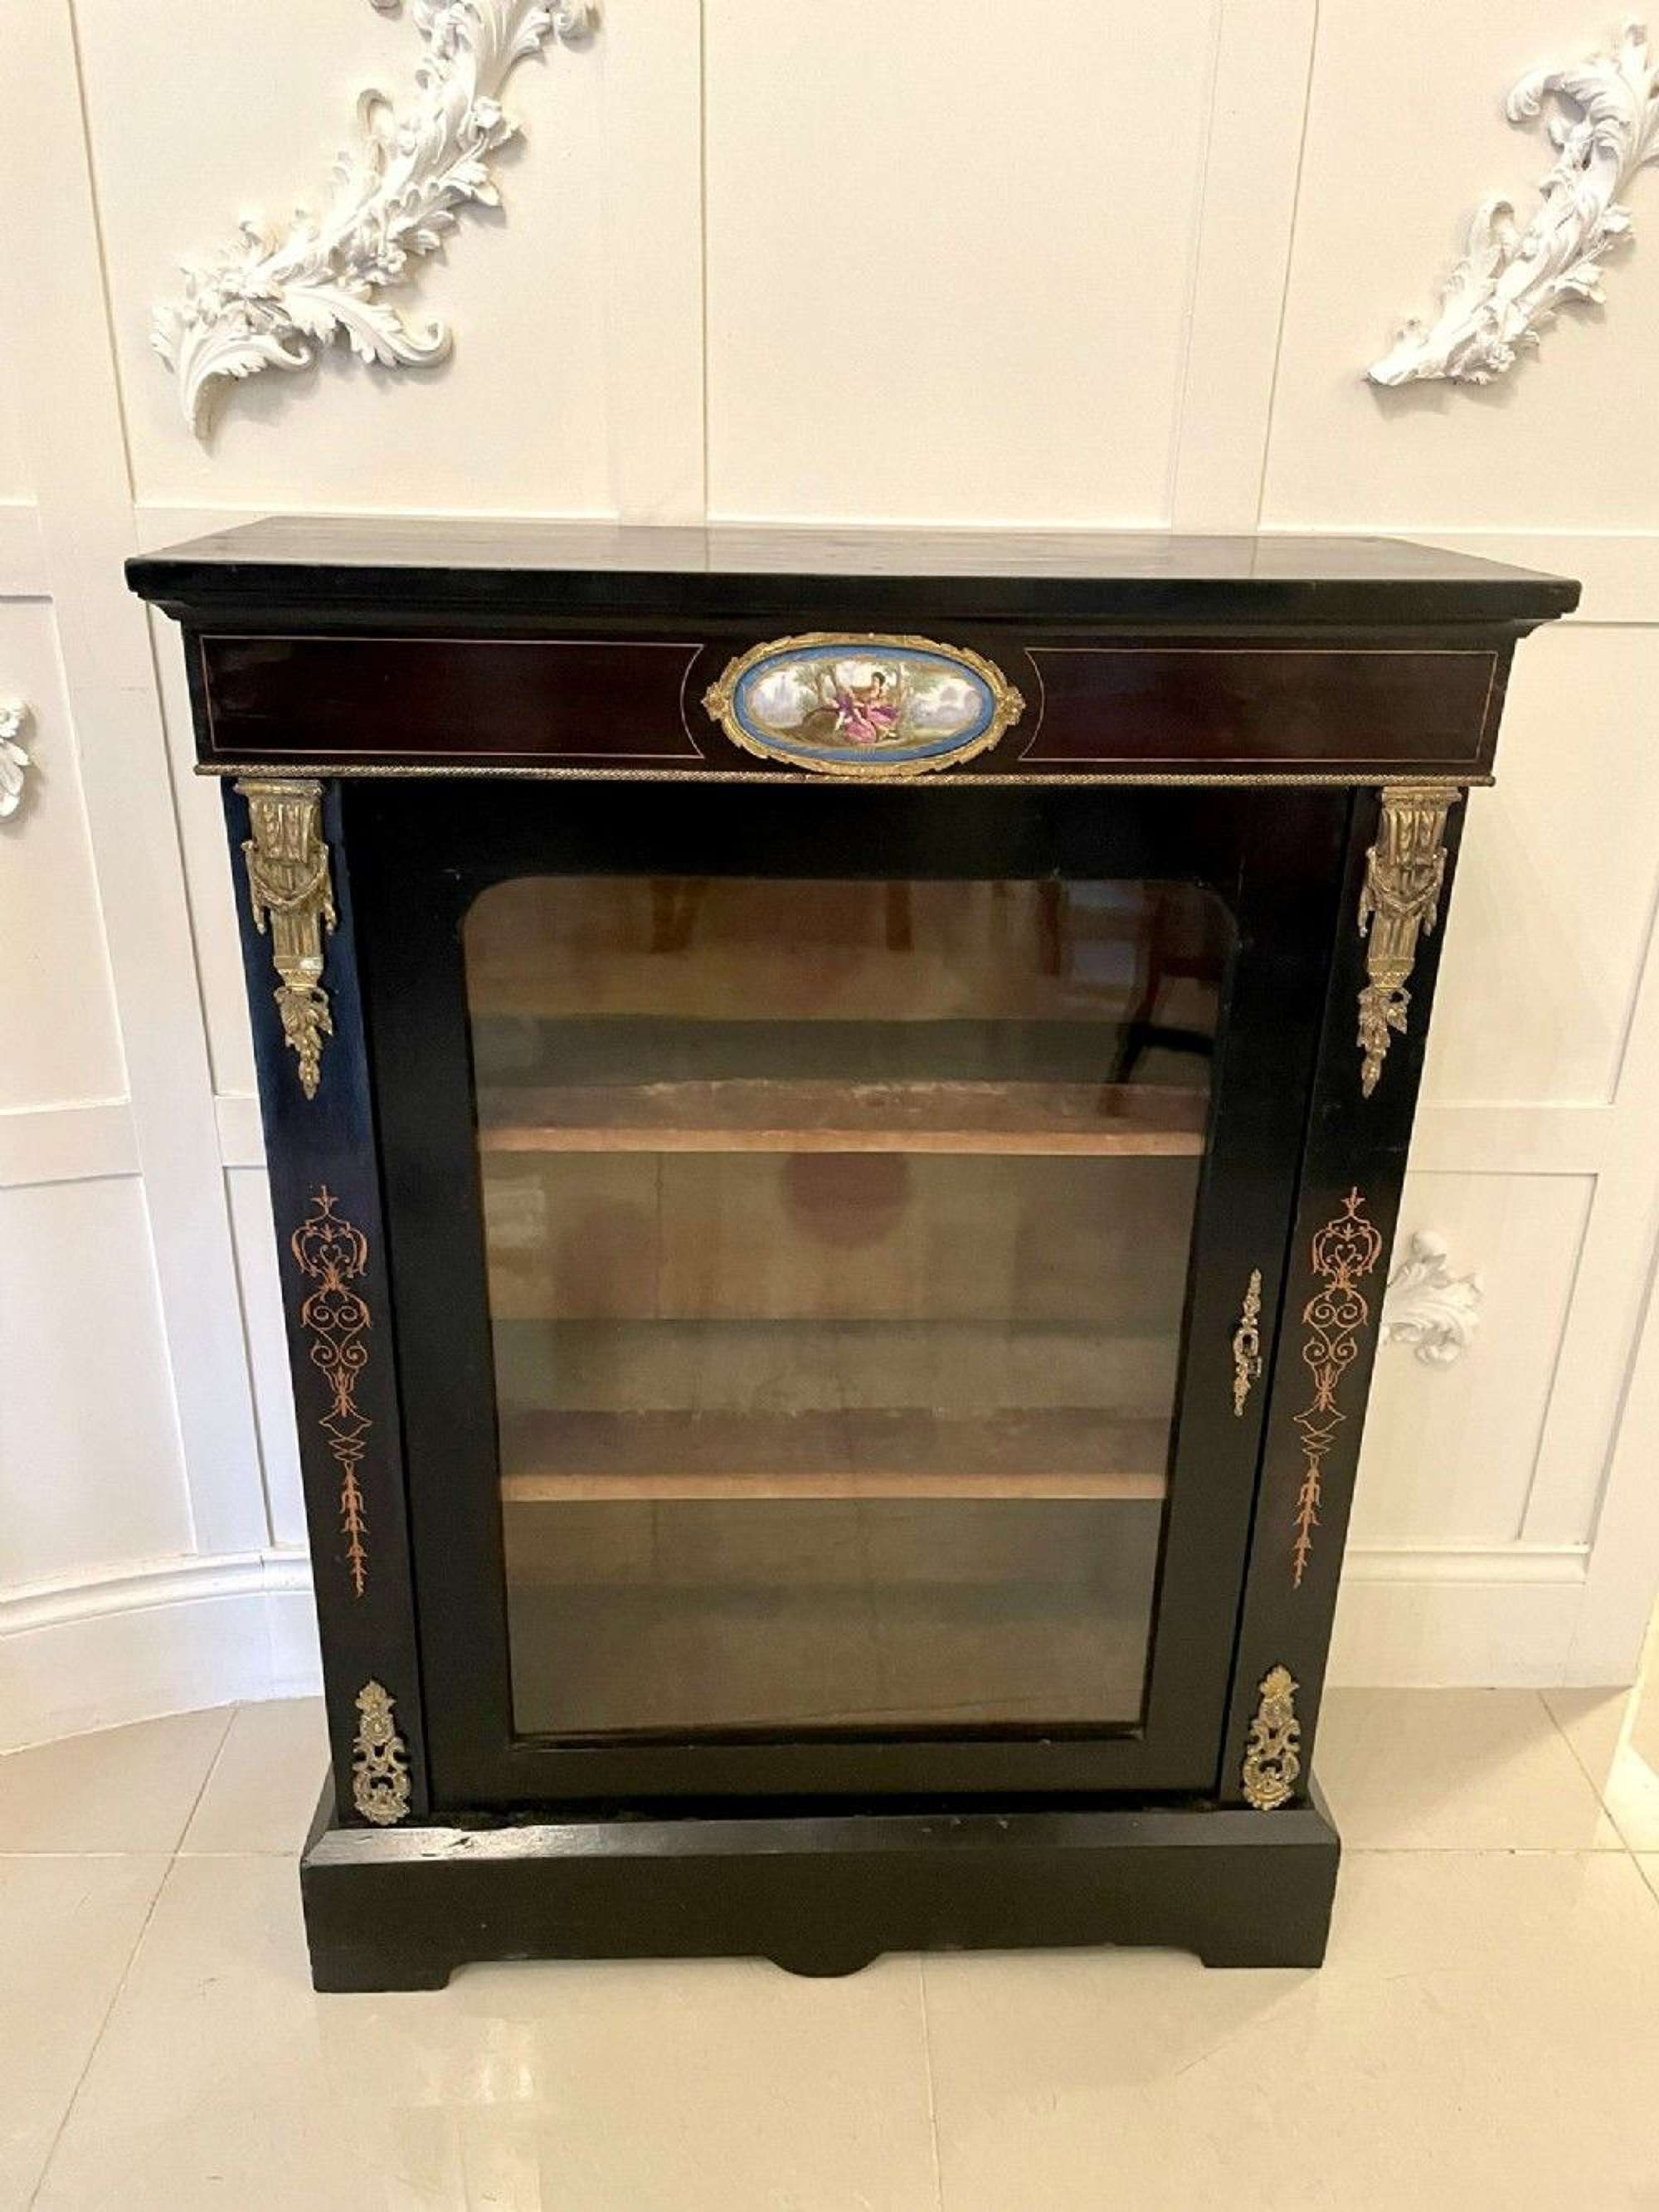 Antique Victorian French Display Cabinet